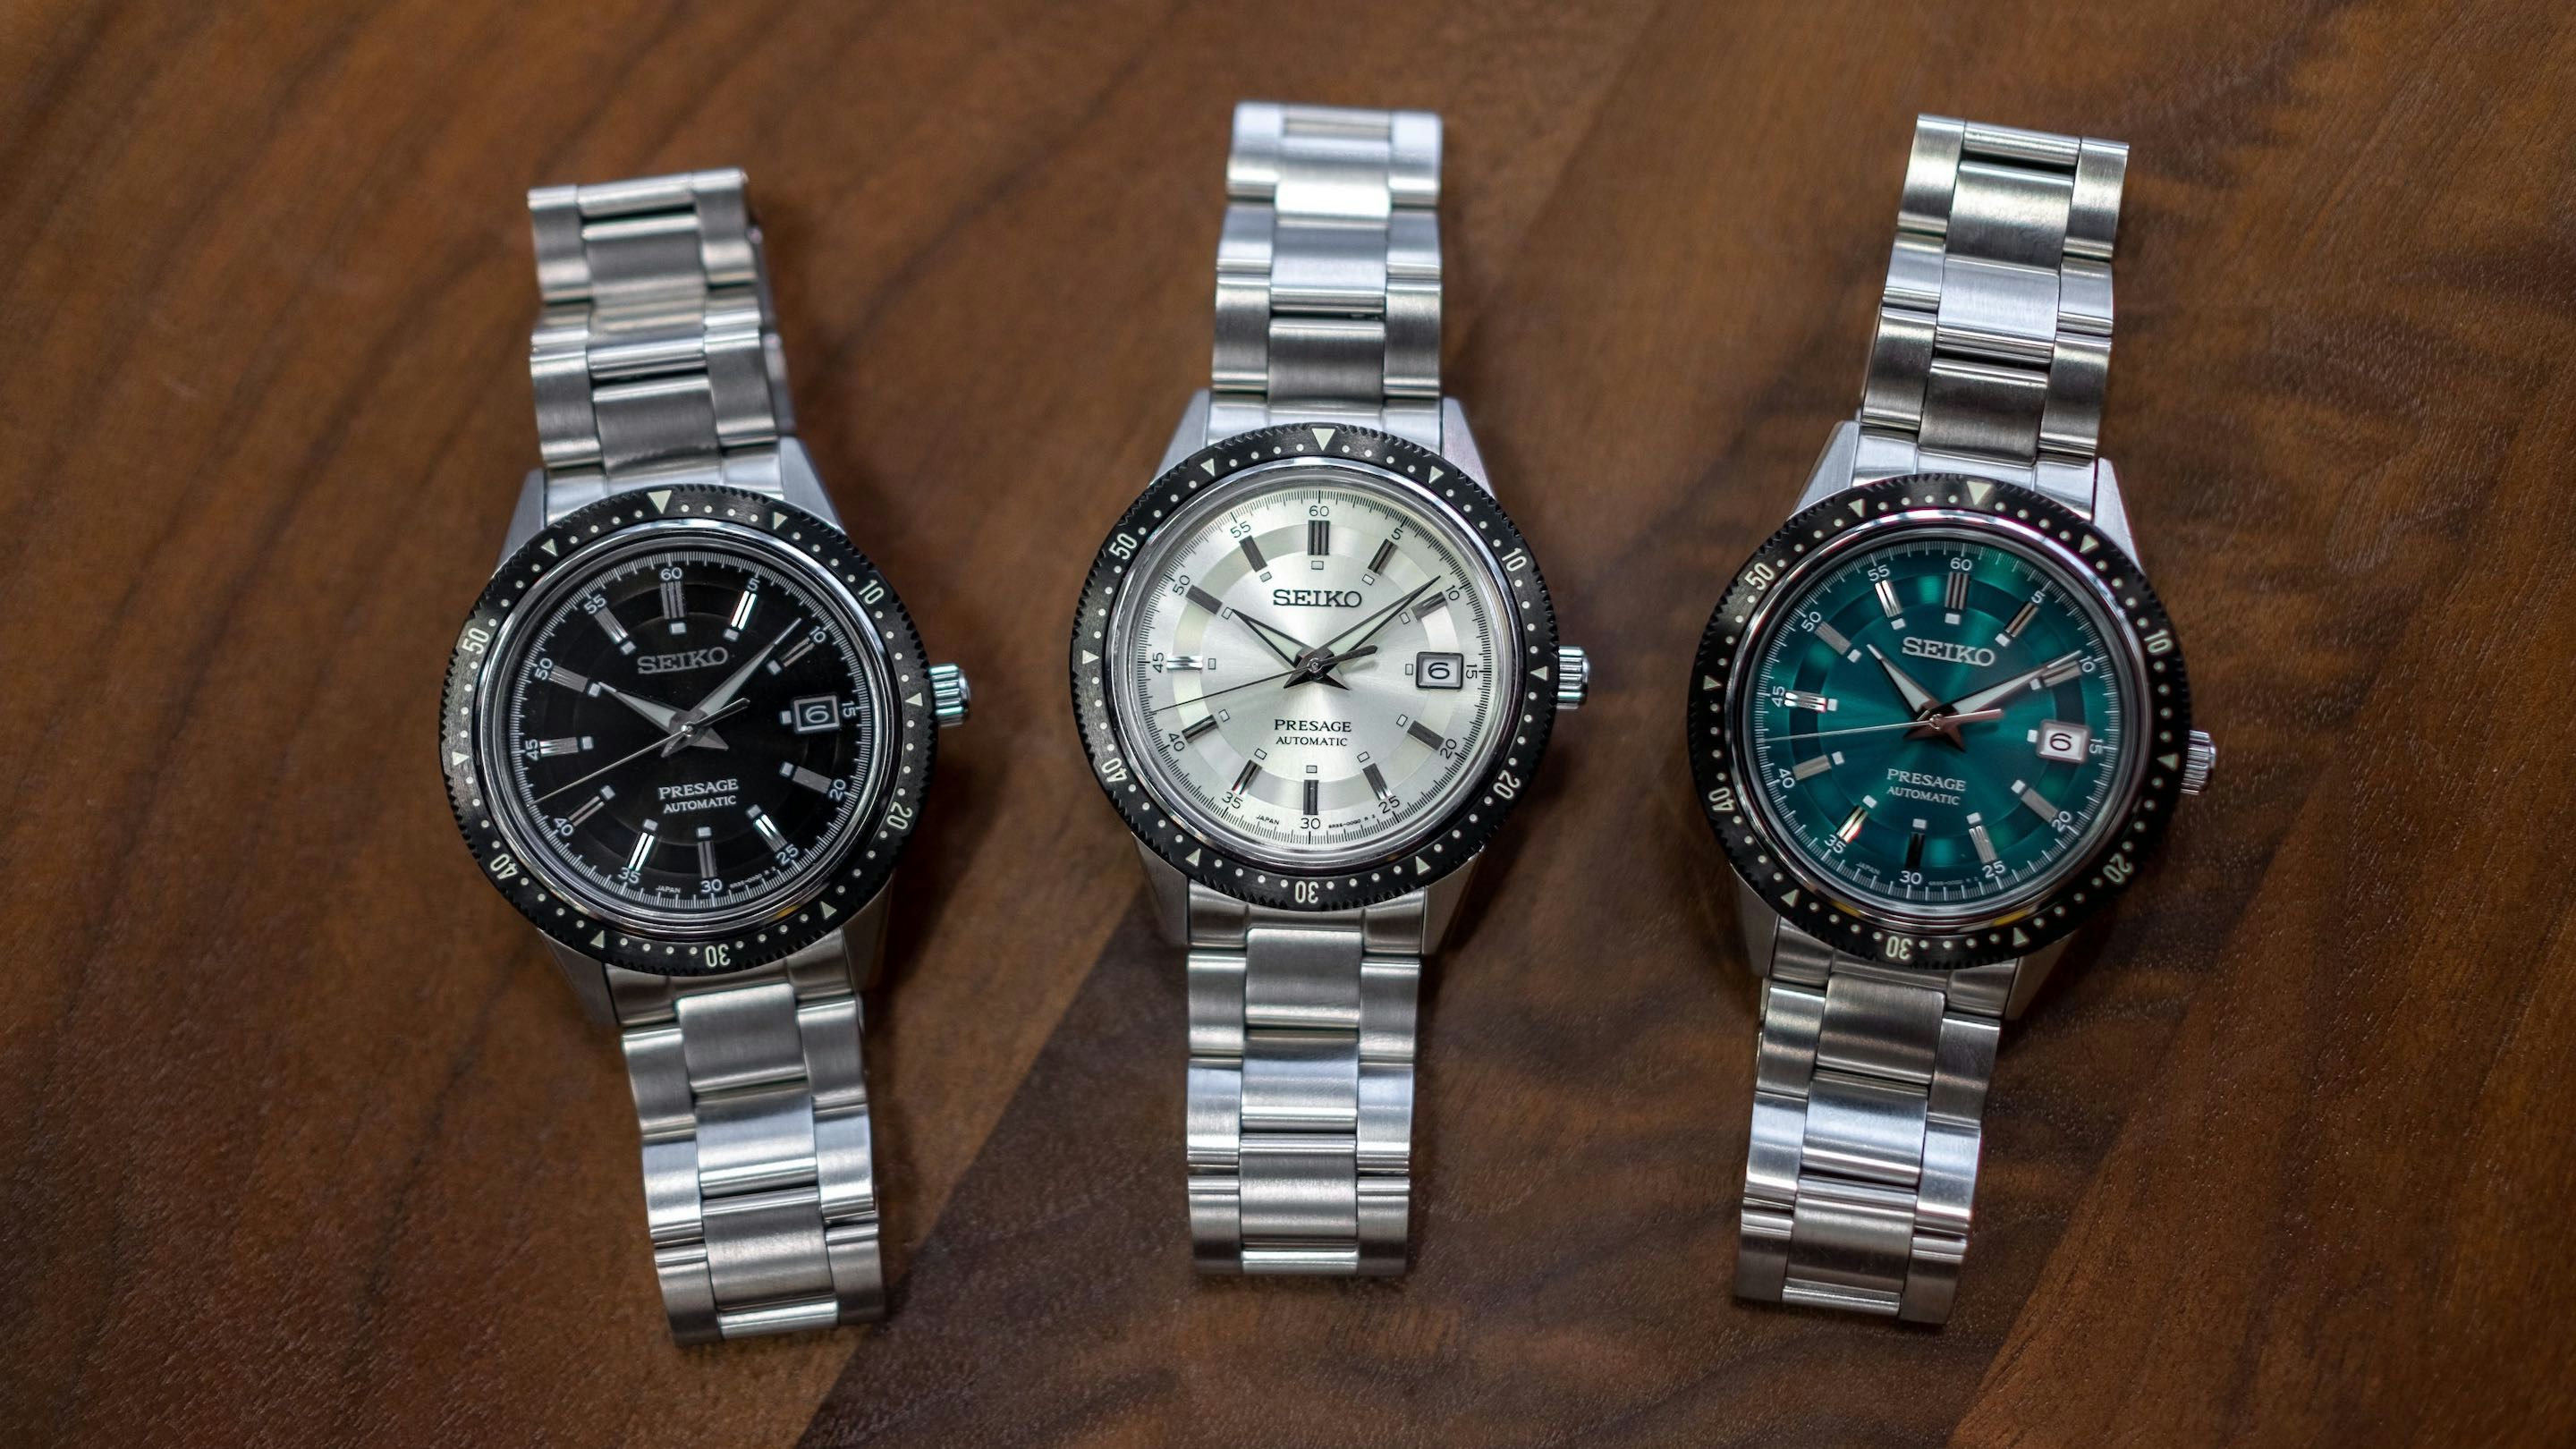 Hands-On: The Seiko Presage Homage To The Crown Chronograph - Hodinkee